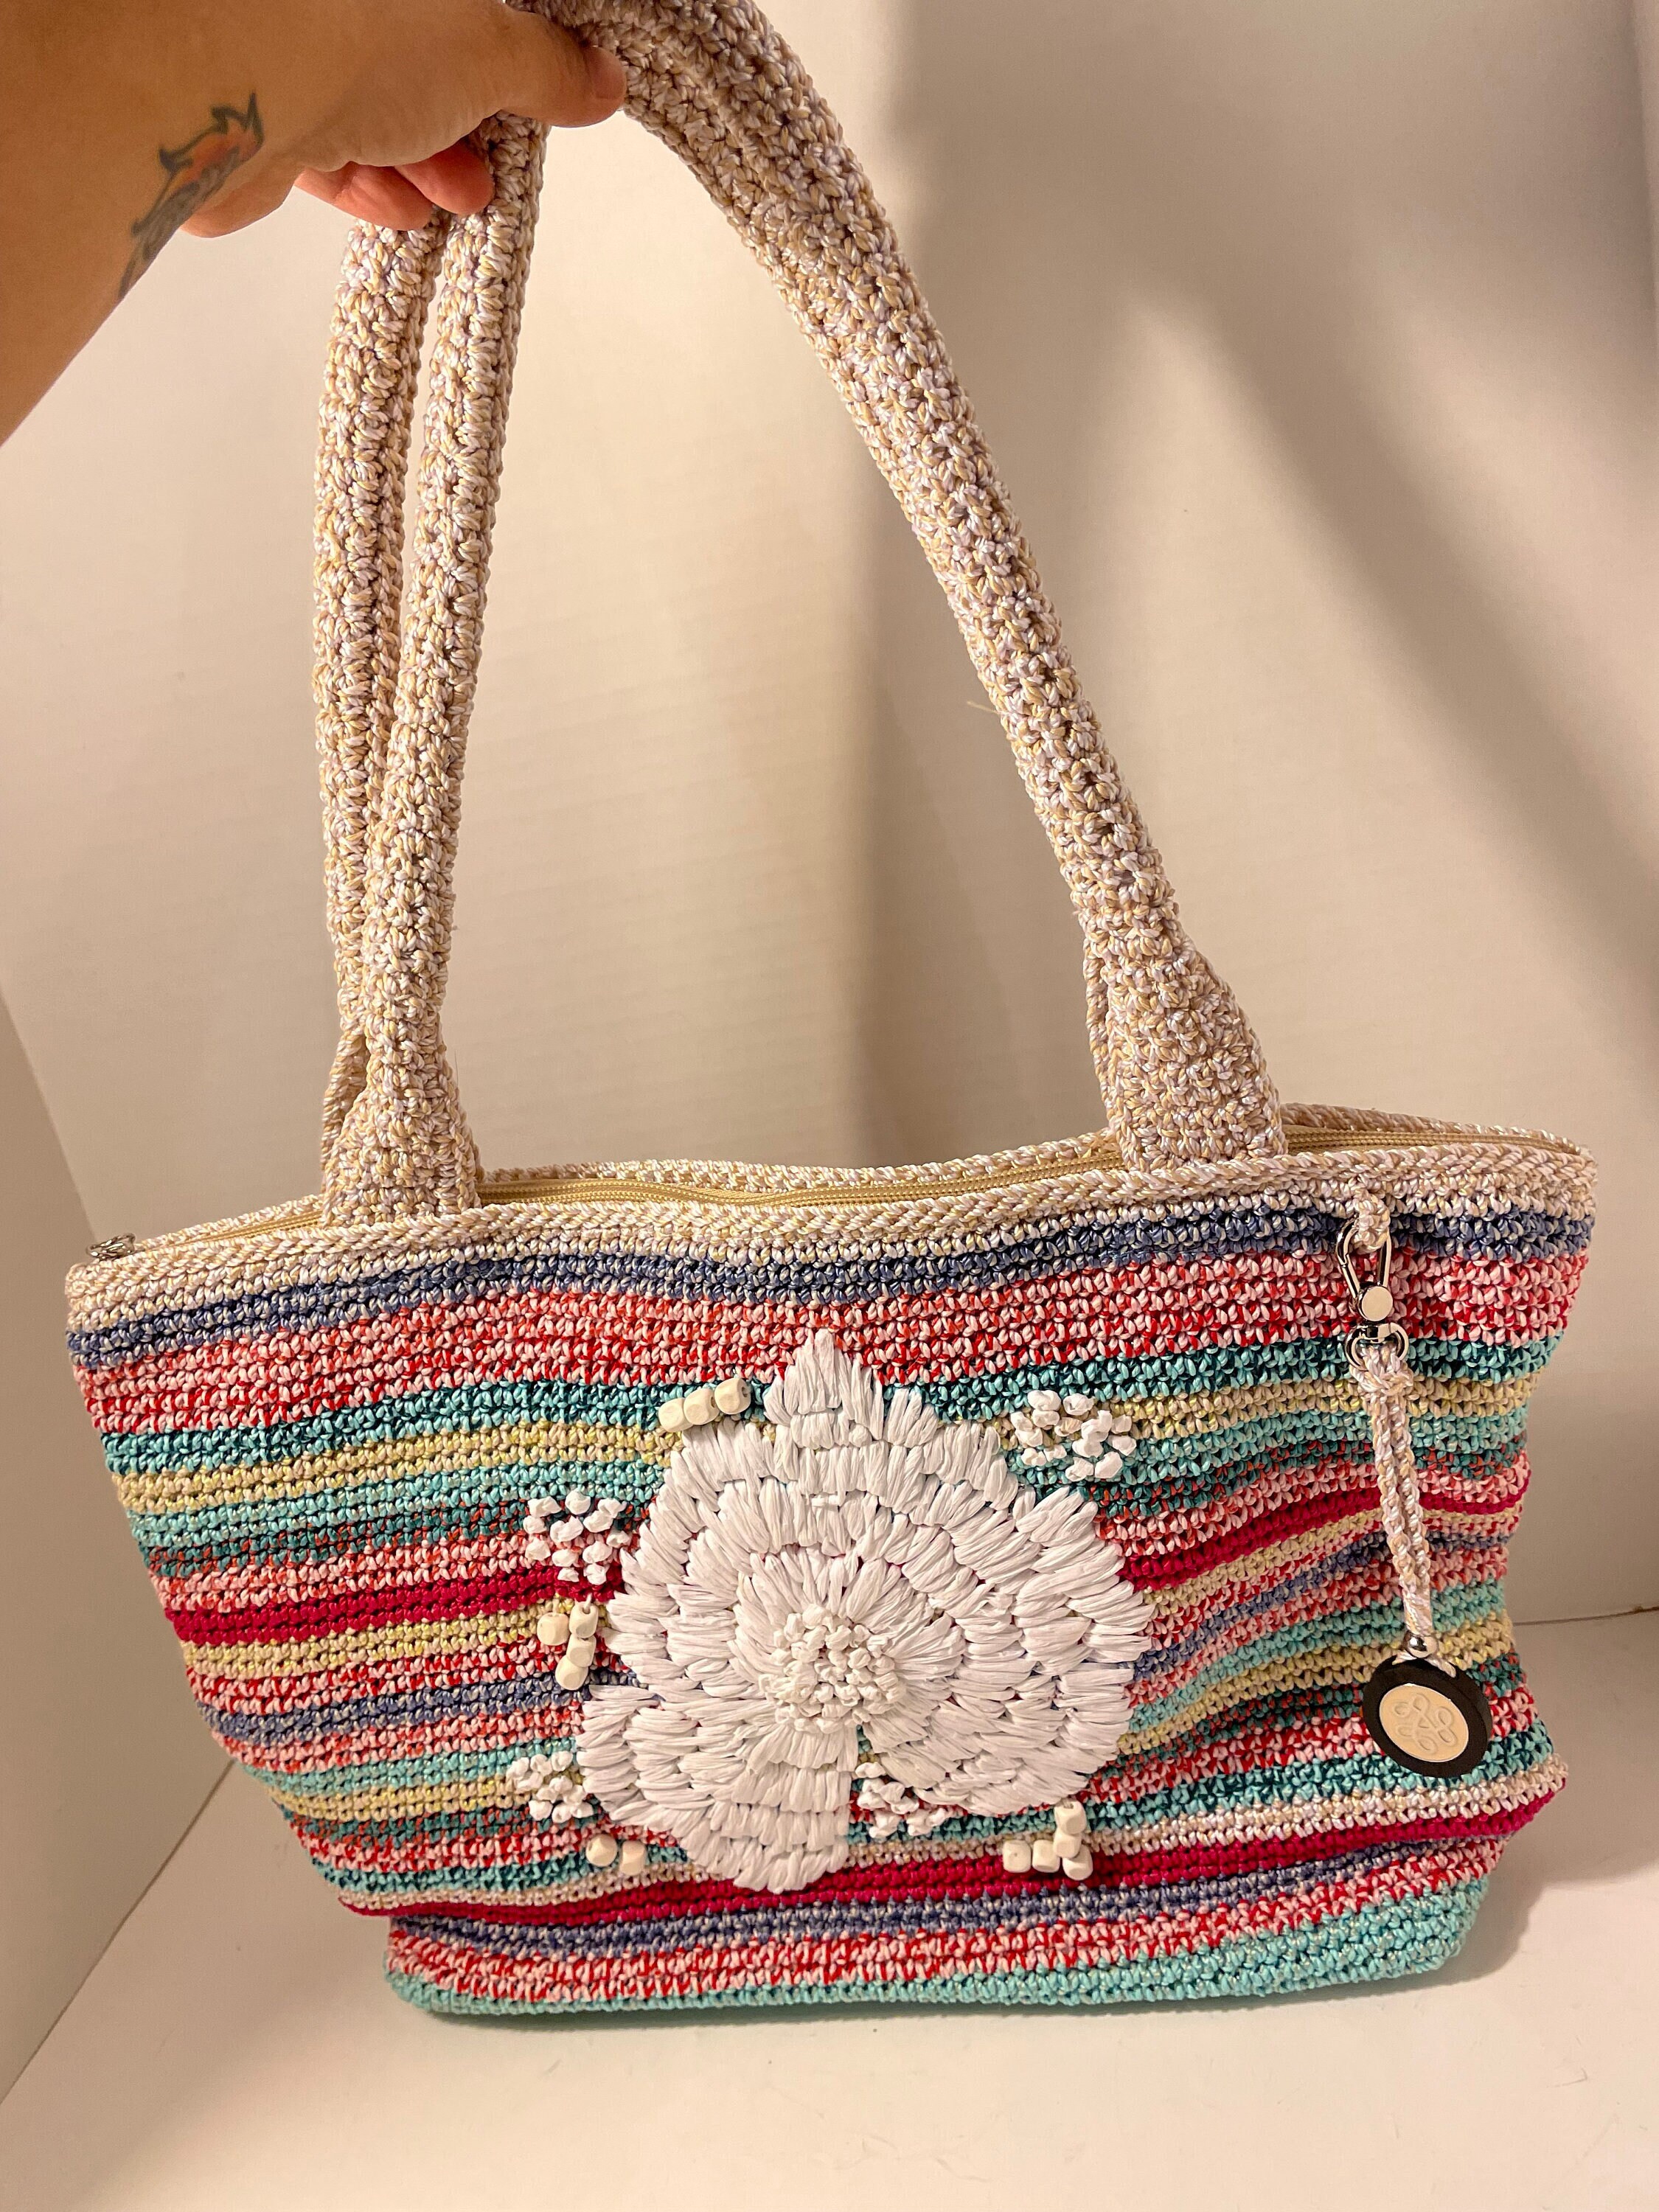 I Make String Pretty - Crochet Hook And Yarn Tote Bag by A Little Leafy